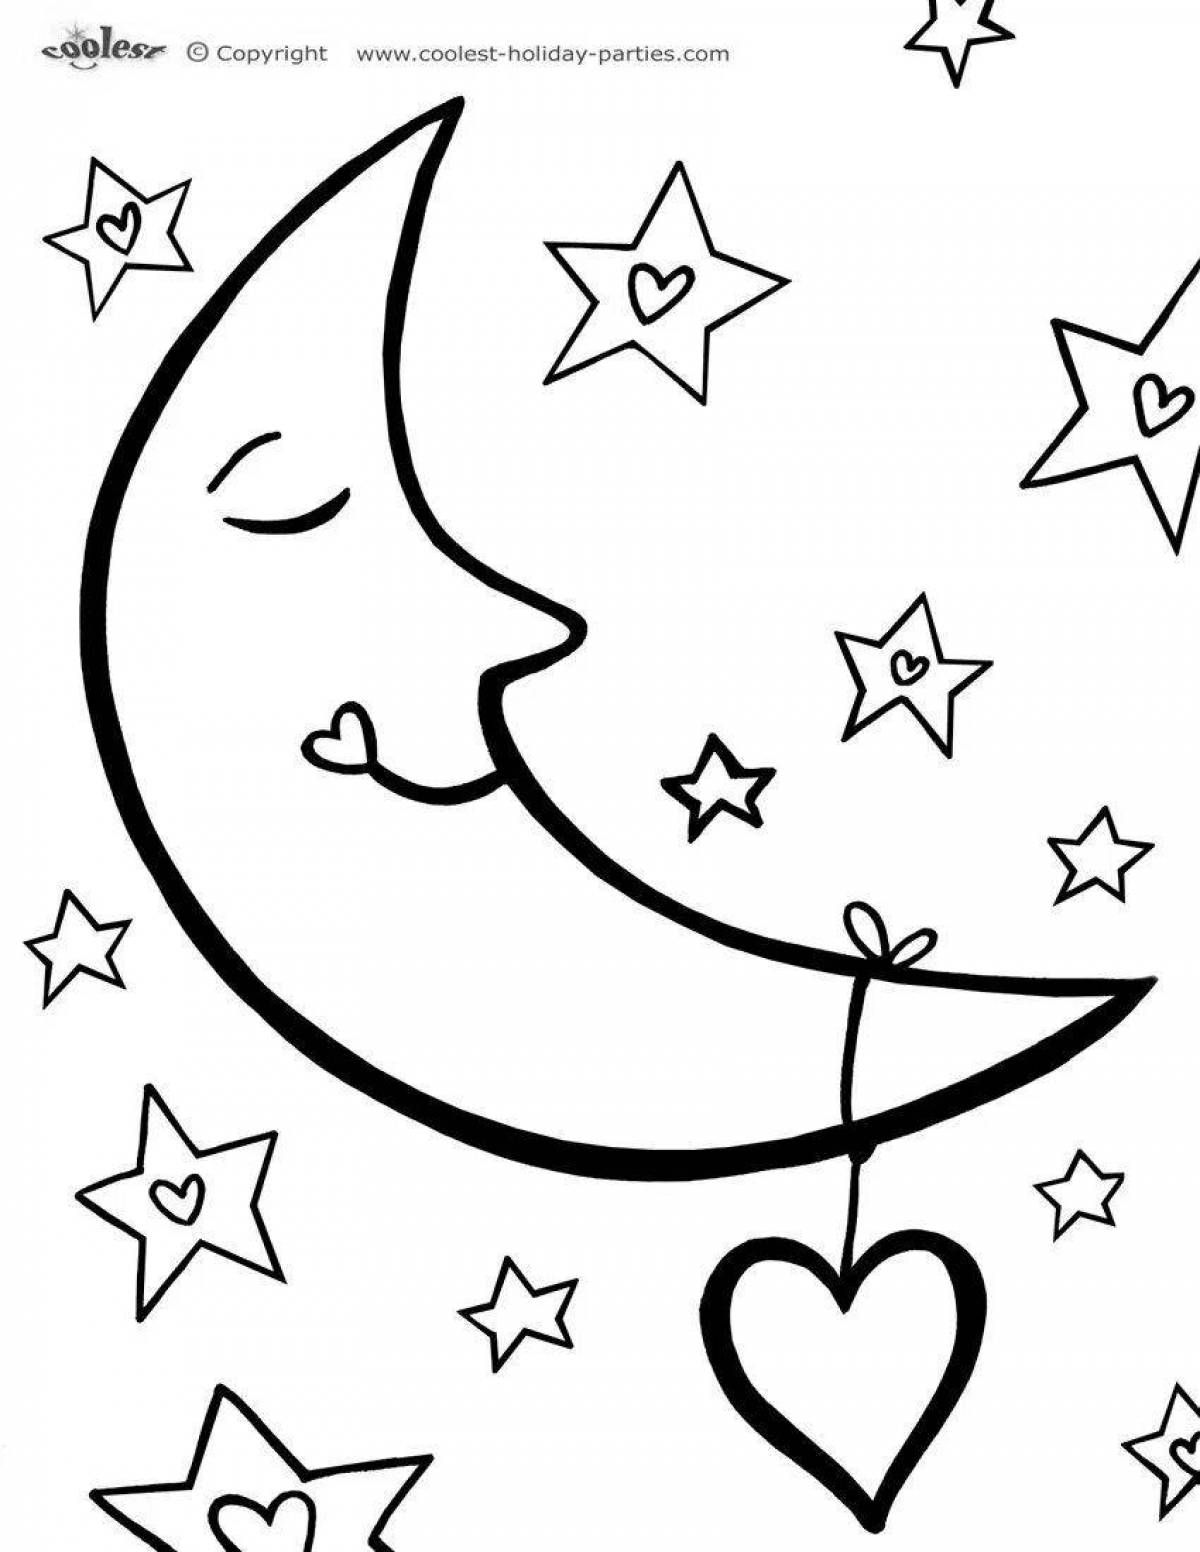 Glorious night coloring pages for kids